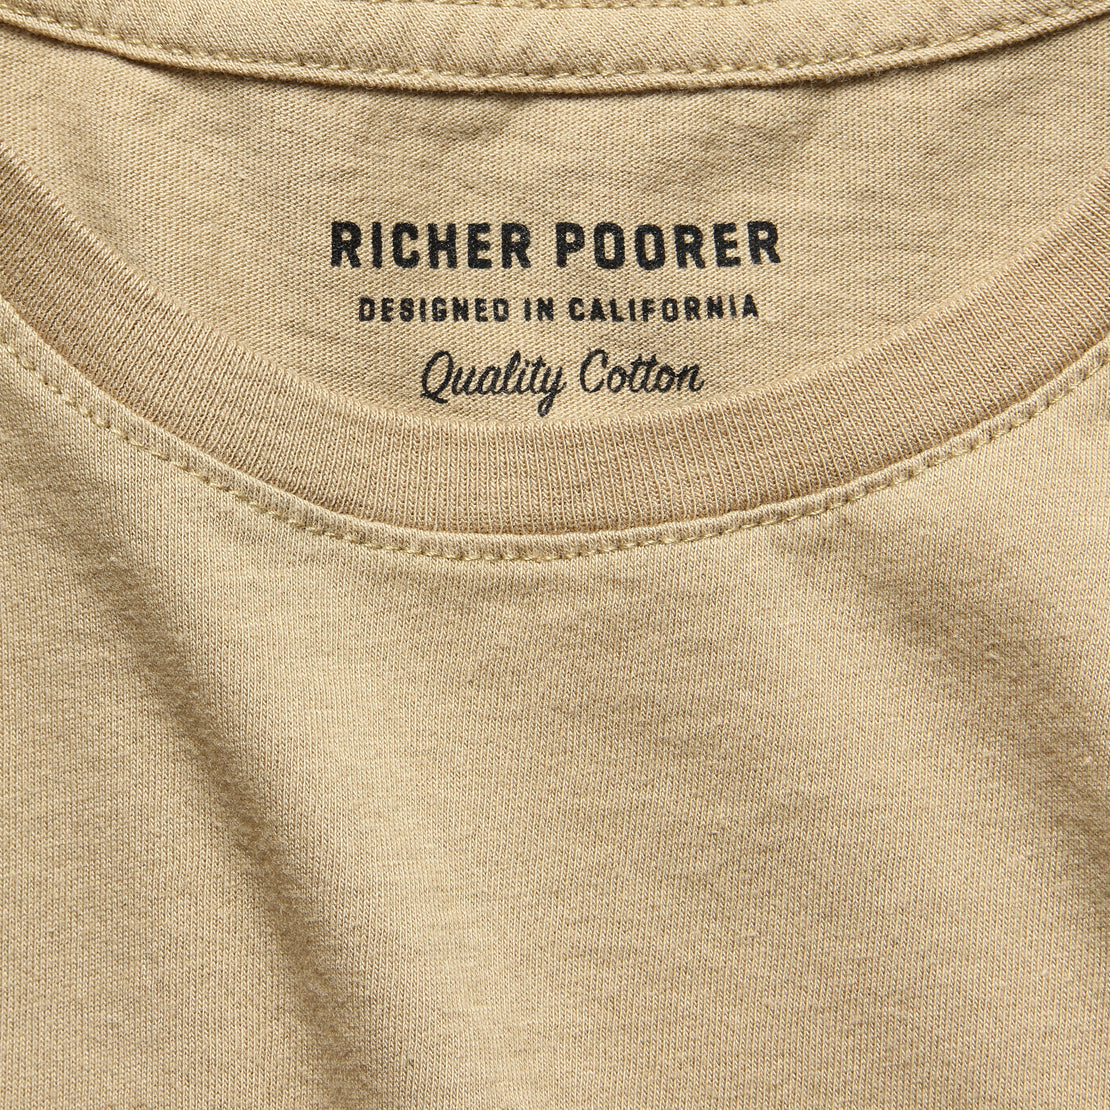 Boxy Crop Tee - Tan - Richer Poorer - STAG Provisions - W - Tops - S/S Tee